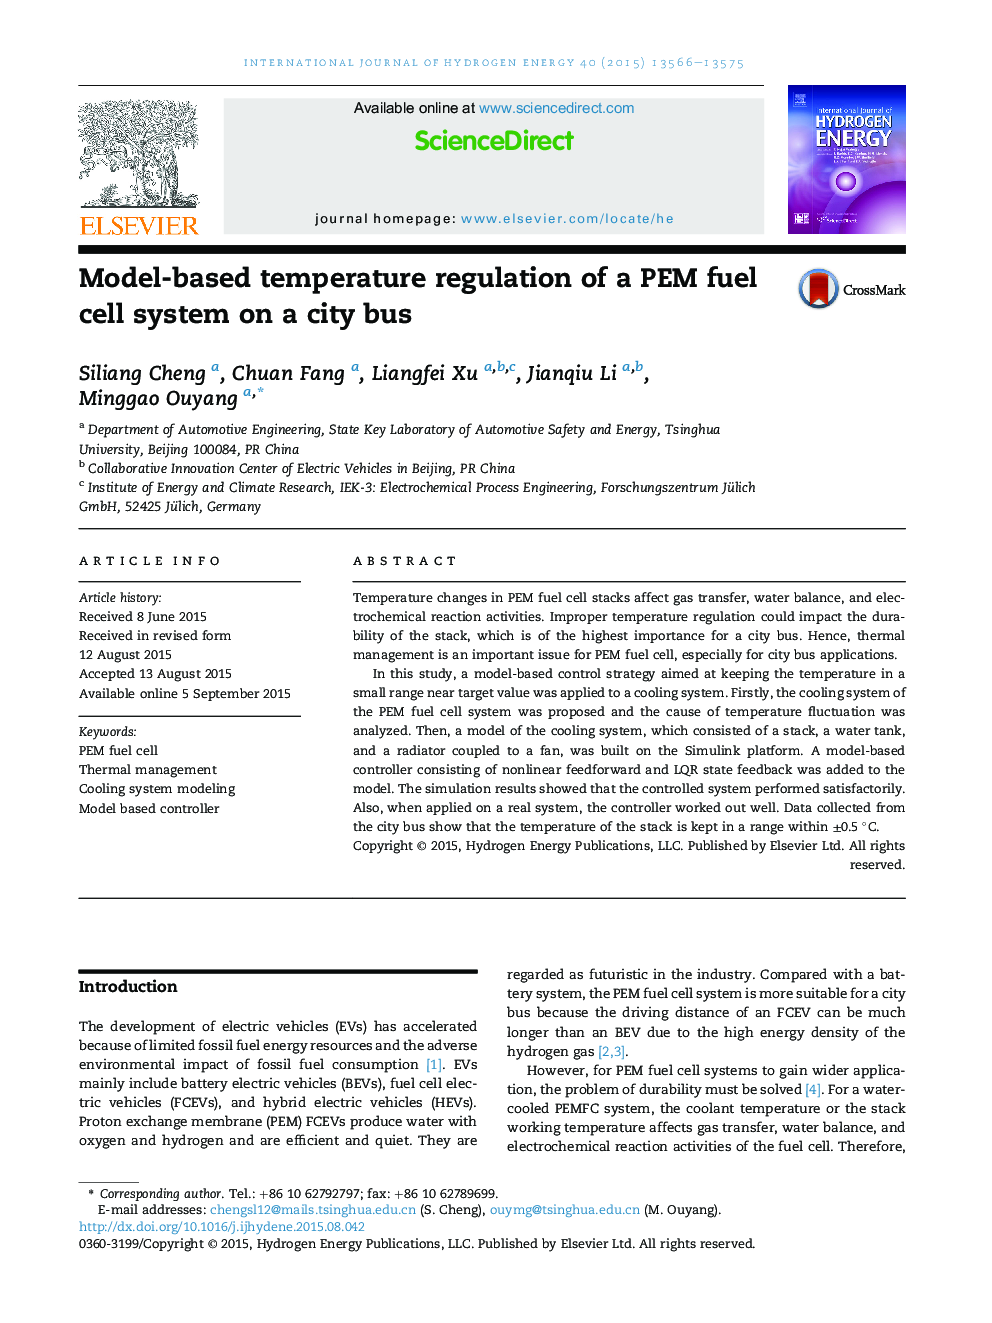 Model-based temperature regulation of a PEM fuel cell system on a city bus